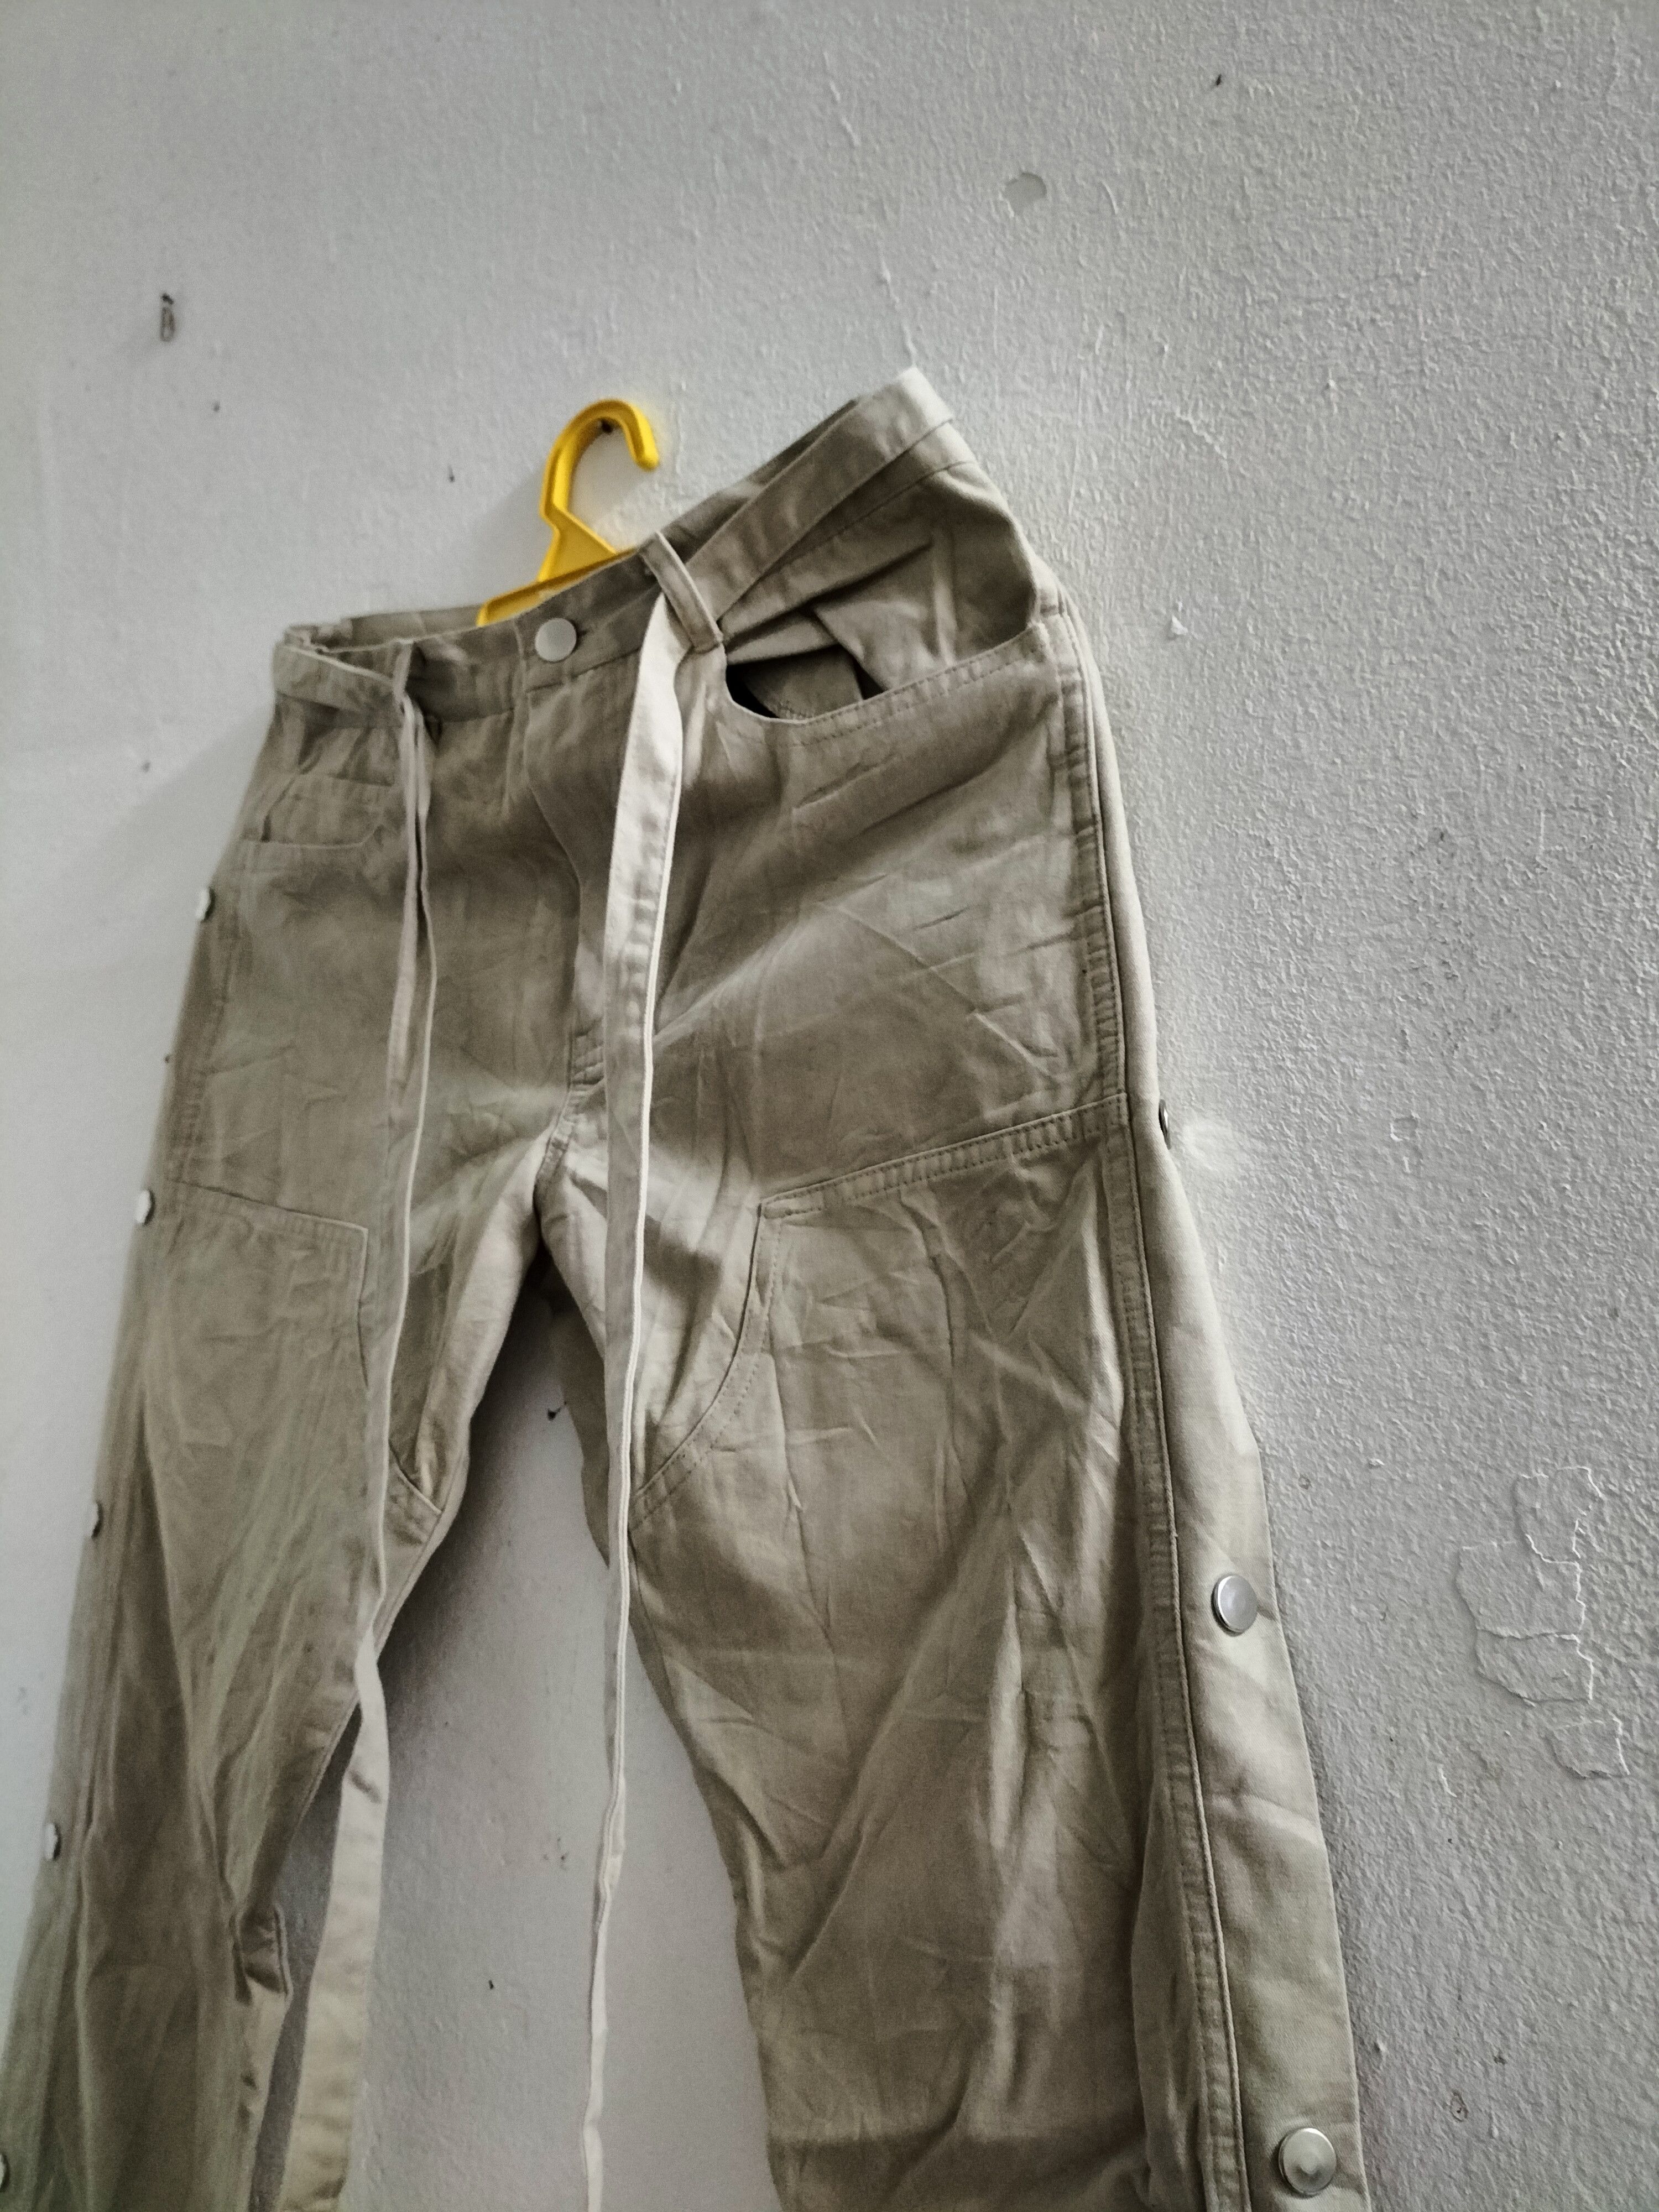 Side button pant